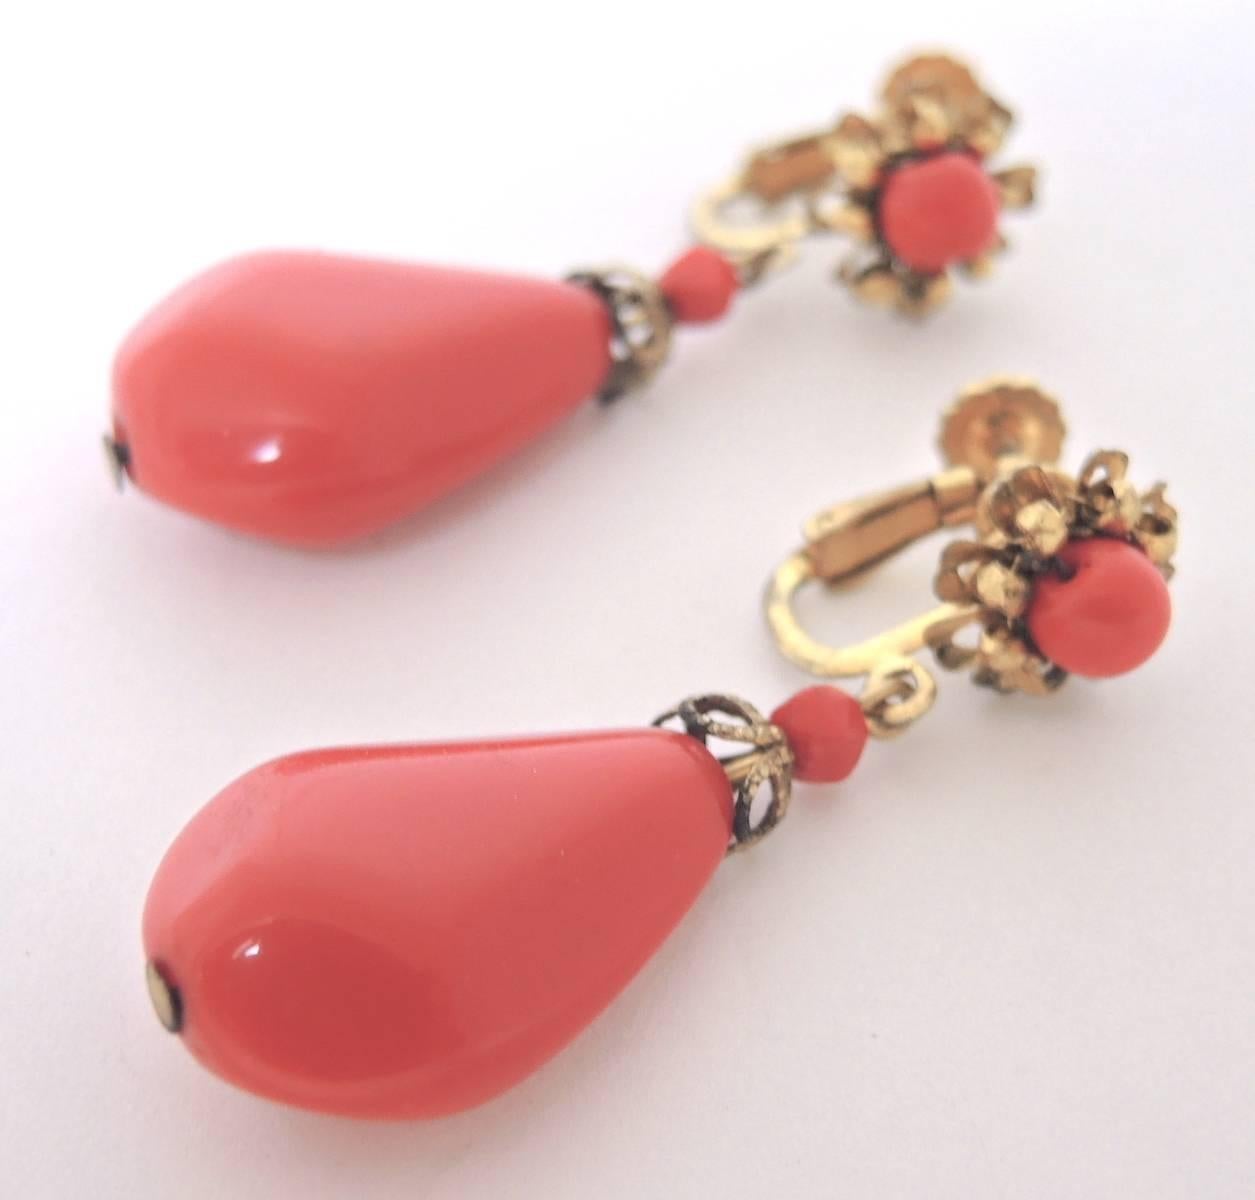 These vintage Miriam Haskell 1950s clip earrings are a perfect accessory to wear any time of the year. These dangling faux coral floral earrings measure 2” x 1/2” and have a gold tone setting. They are signed “Miriam Haskell” and are in excellent